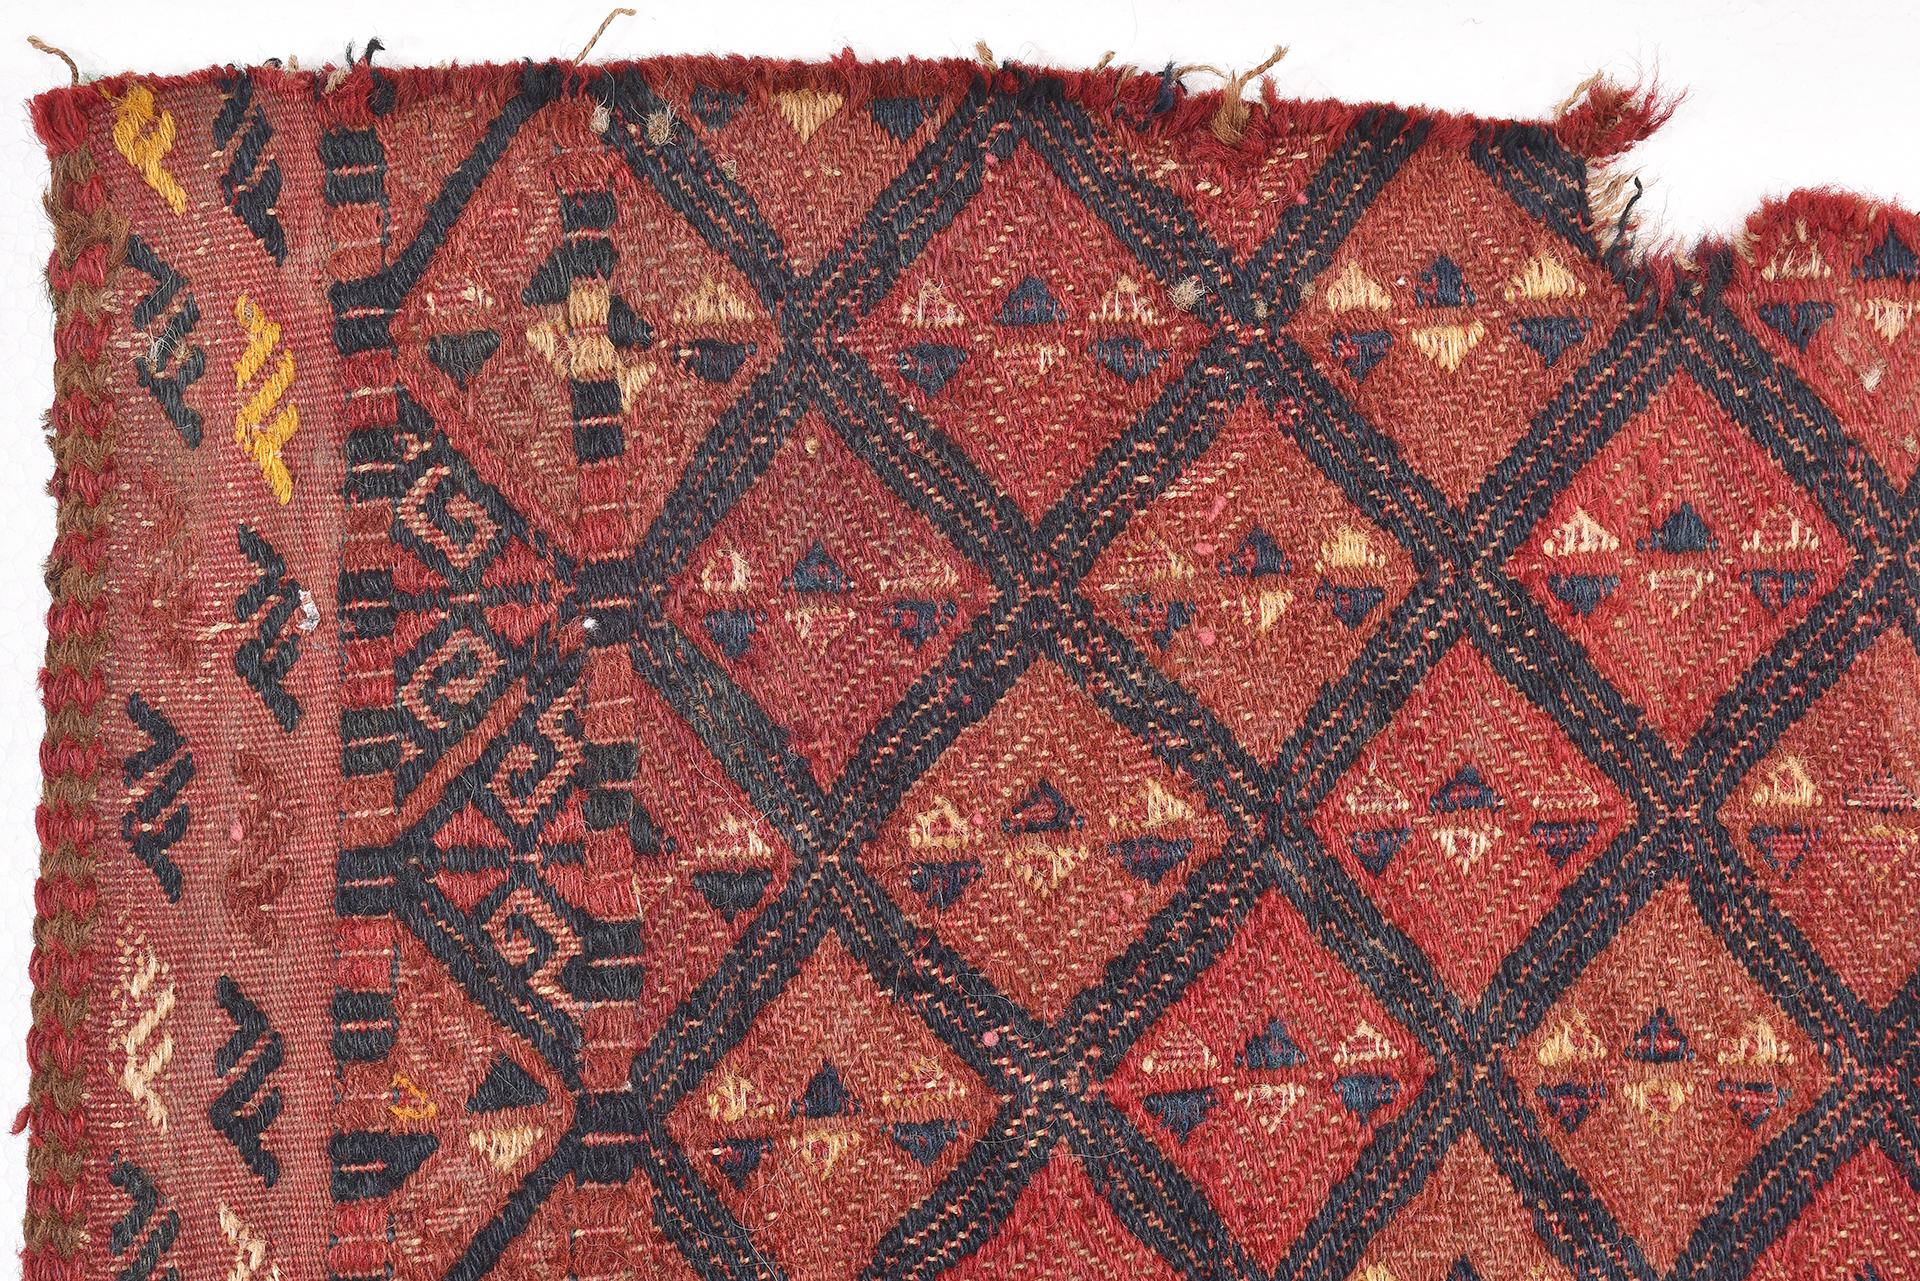 Hand-Woven  Turkoman Horse Bag Fragment  For Sale